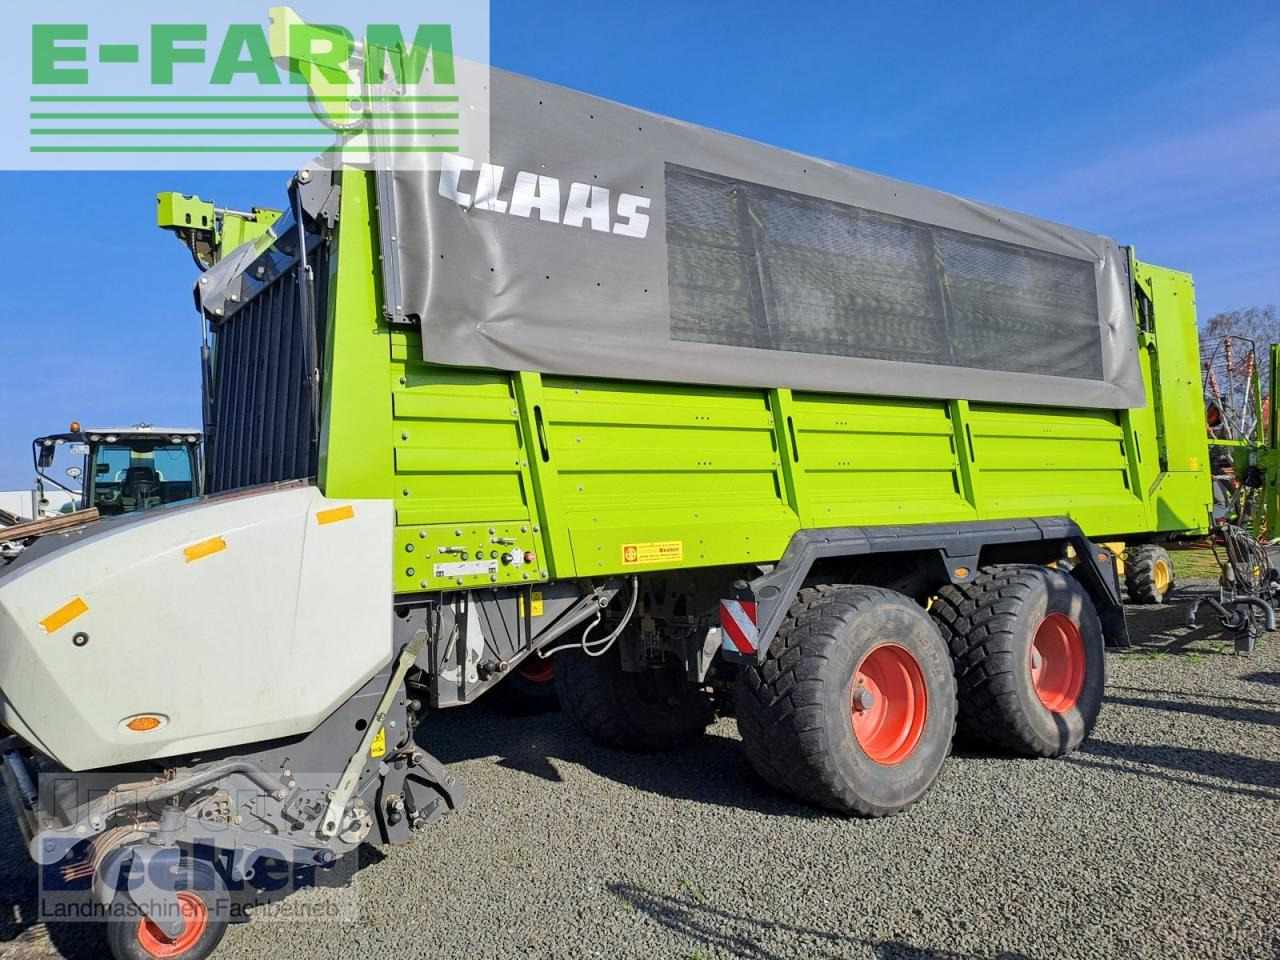 Self-loading wagon CLAAS cargos 8500 s: picture 2